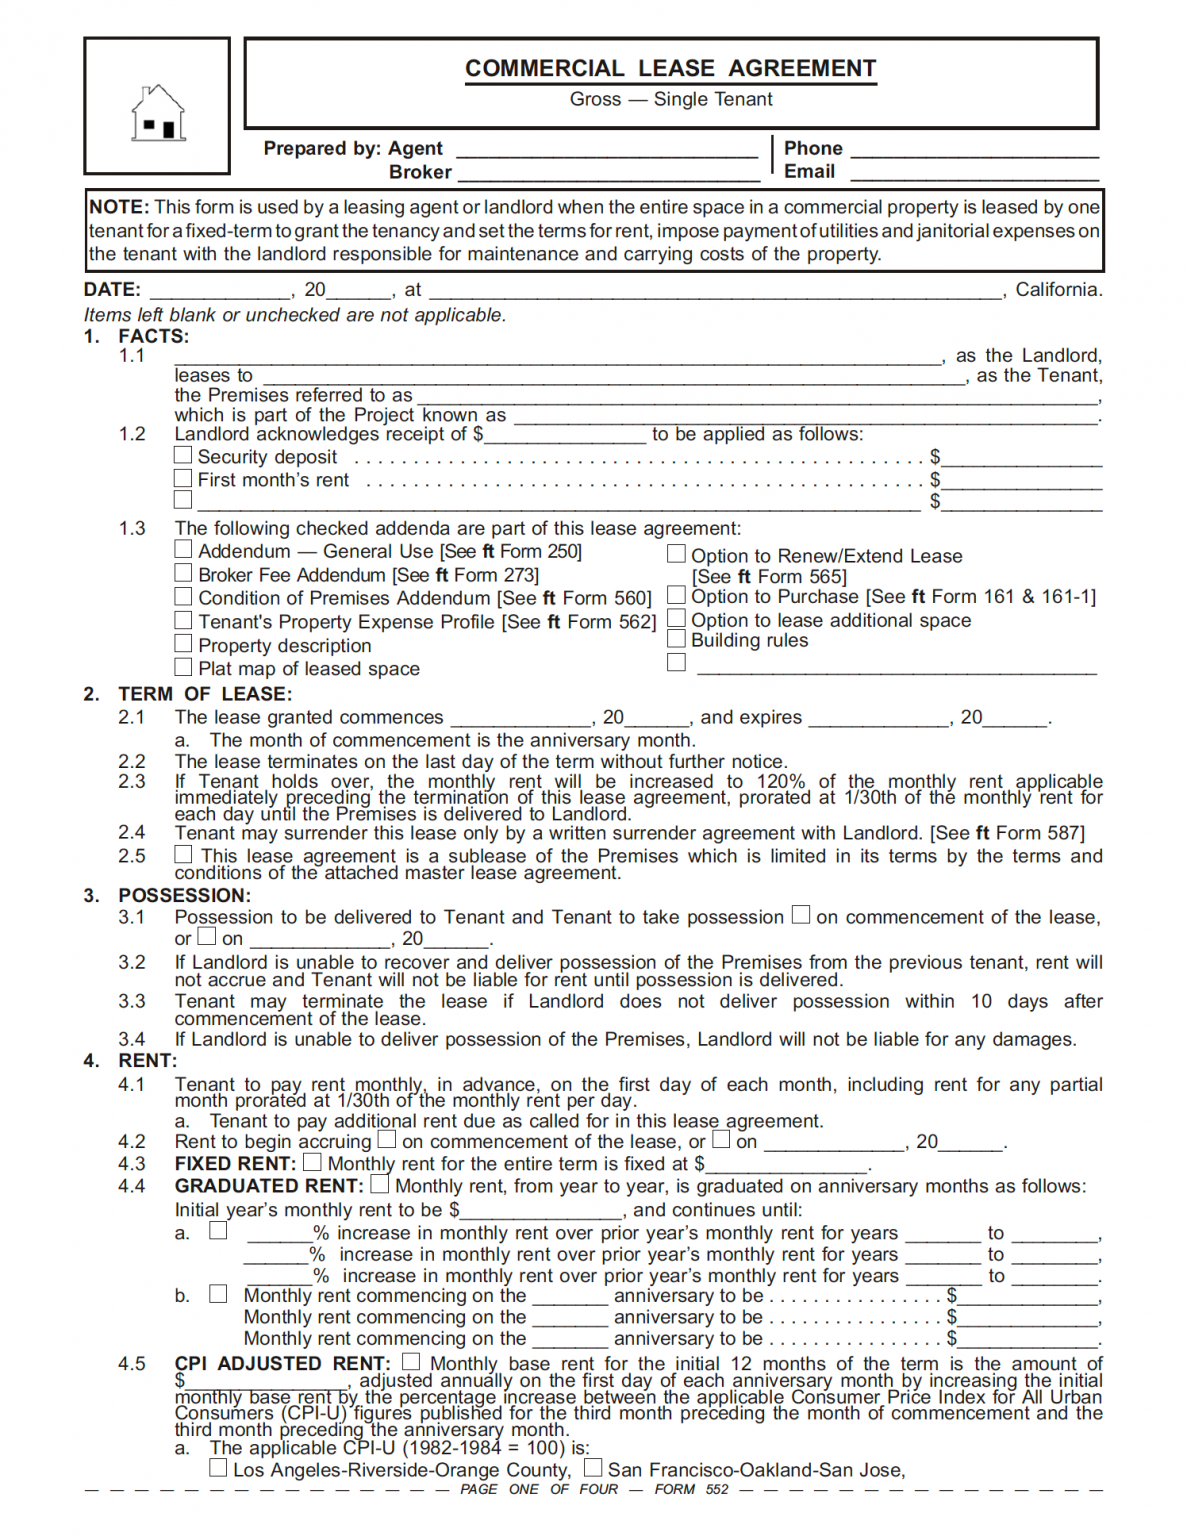 Free California Commercial Lease Agreement PDF